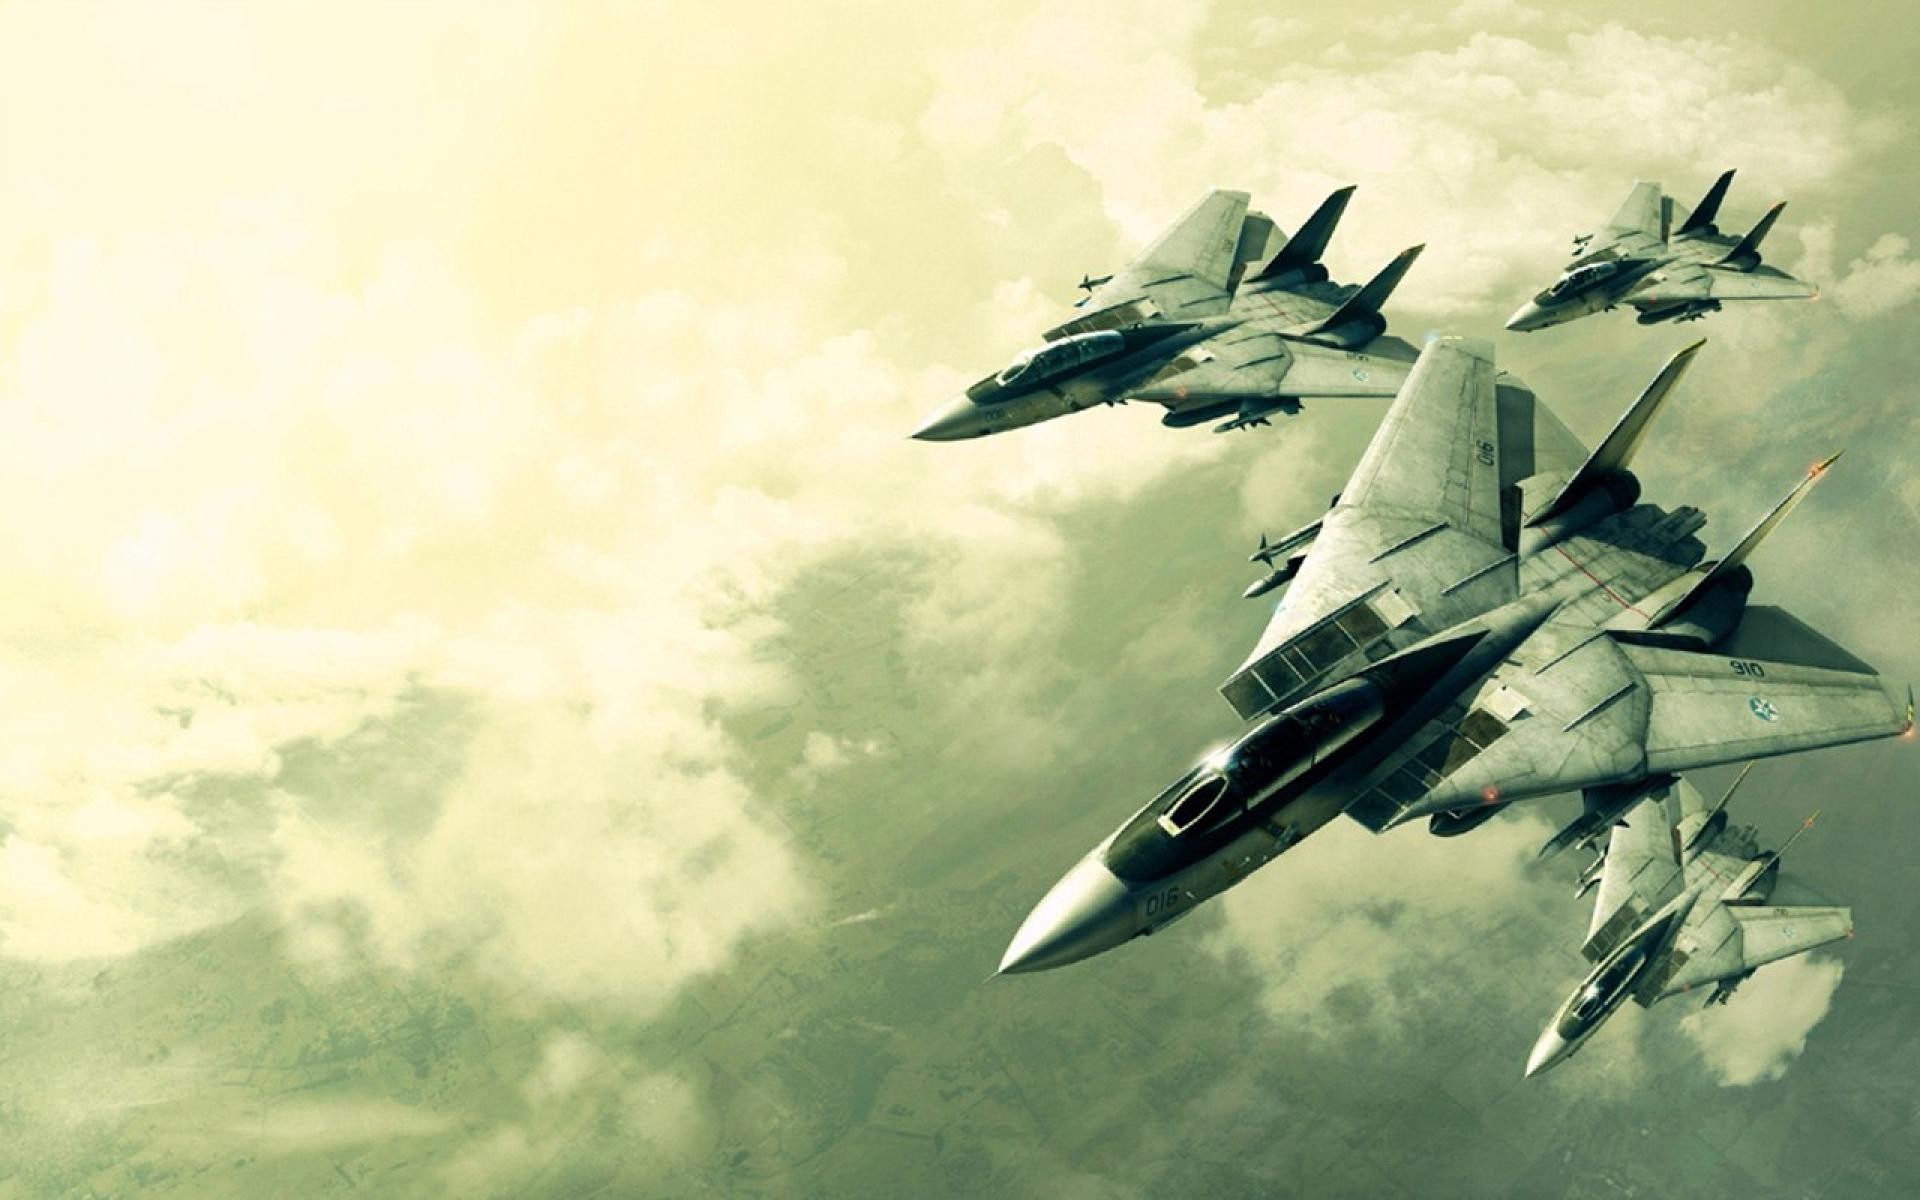 1920x1200 ACE COMBAT game jet airplane aircraft fighter plane military gd wallpaper |   | 225400 | WallpaperUP